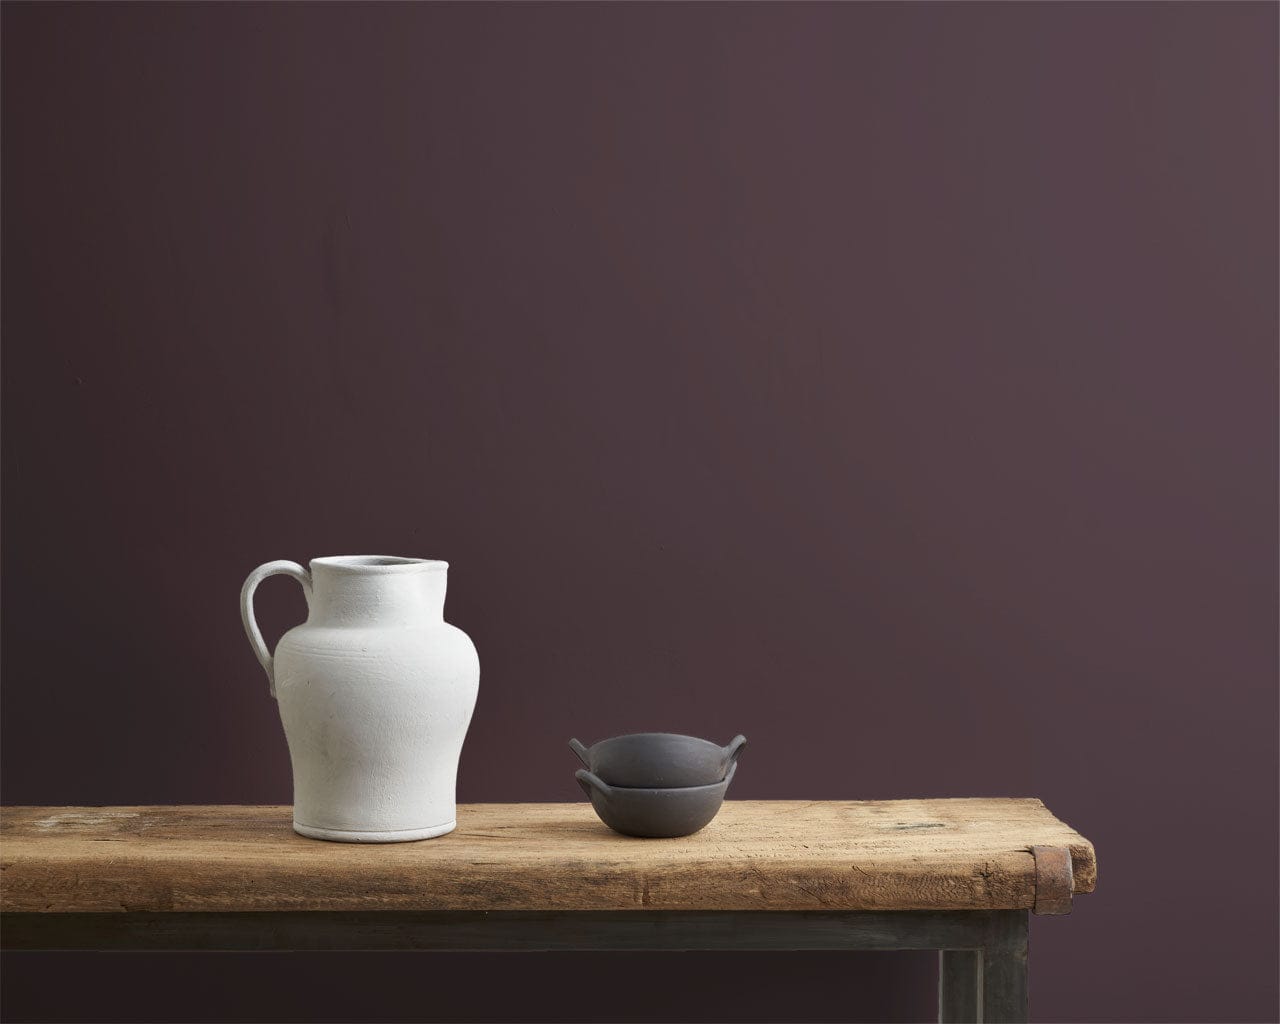 Annie Sloan Wall Paint Tyrian Plum - 1 Gallon - Five and Divine